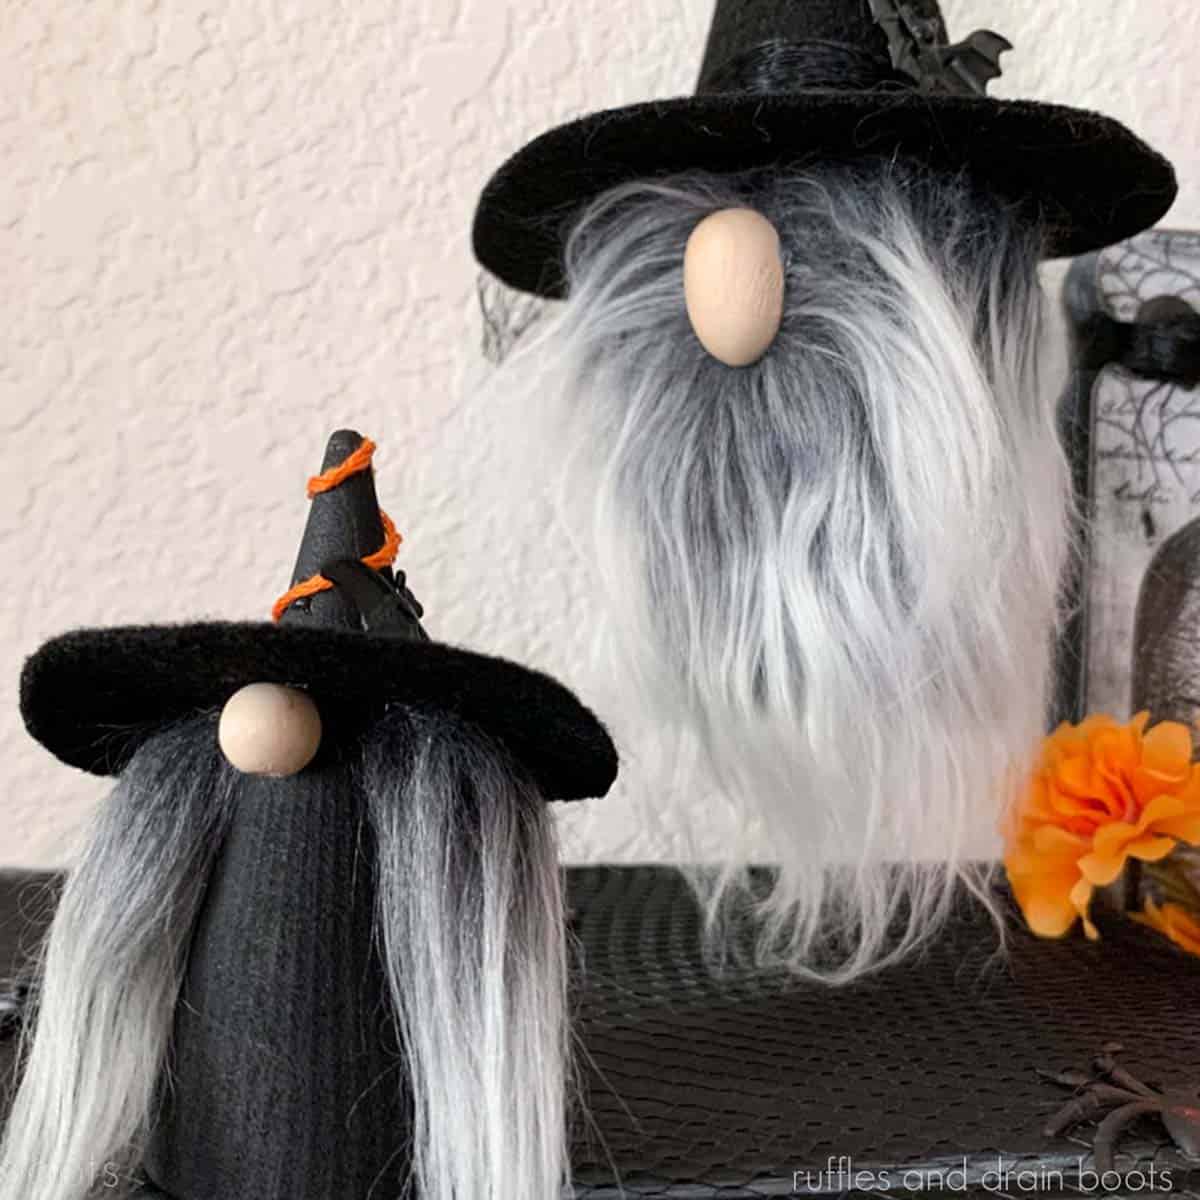 Square image of two Halloween gnomes made to look like witches.